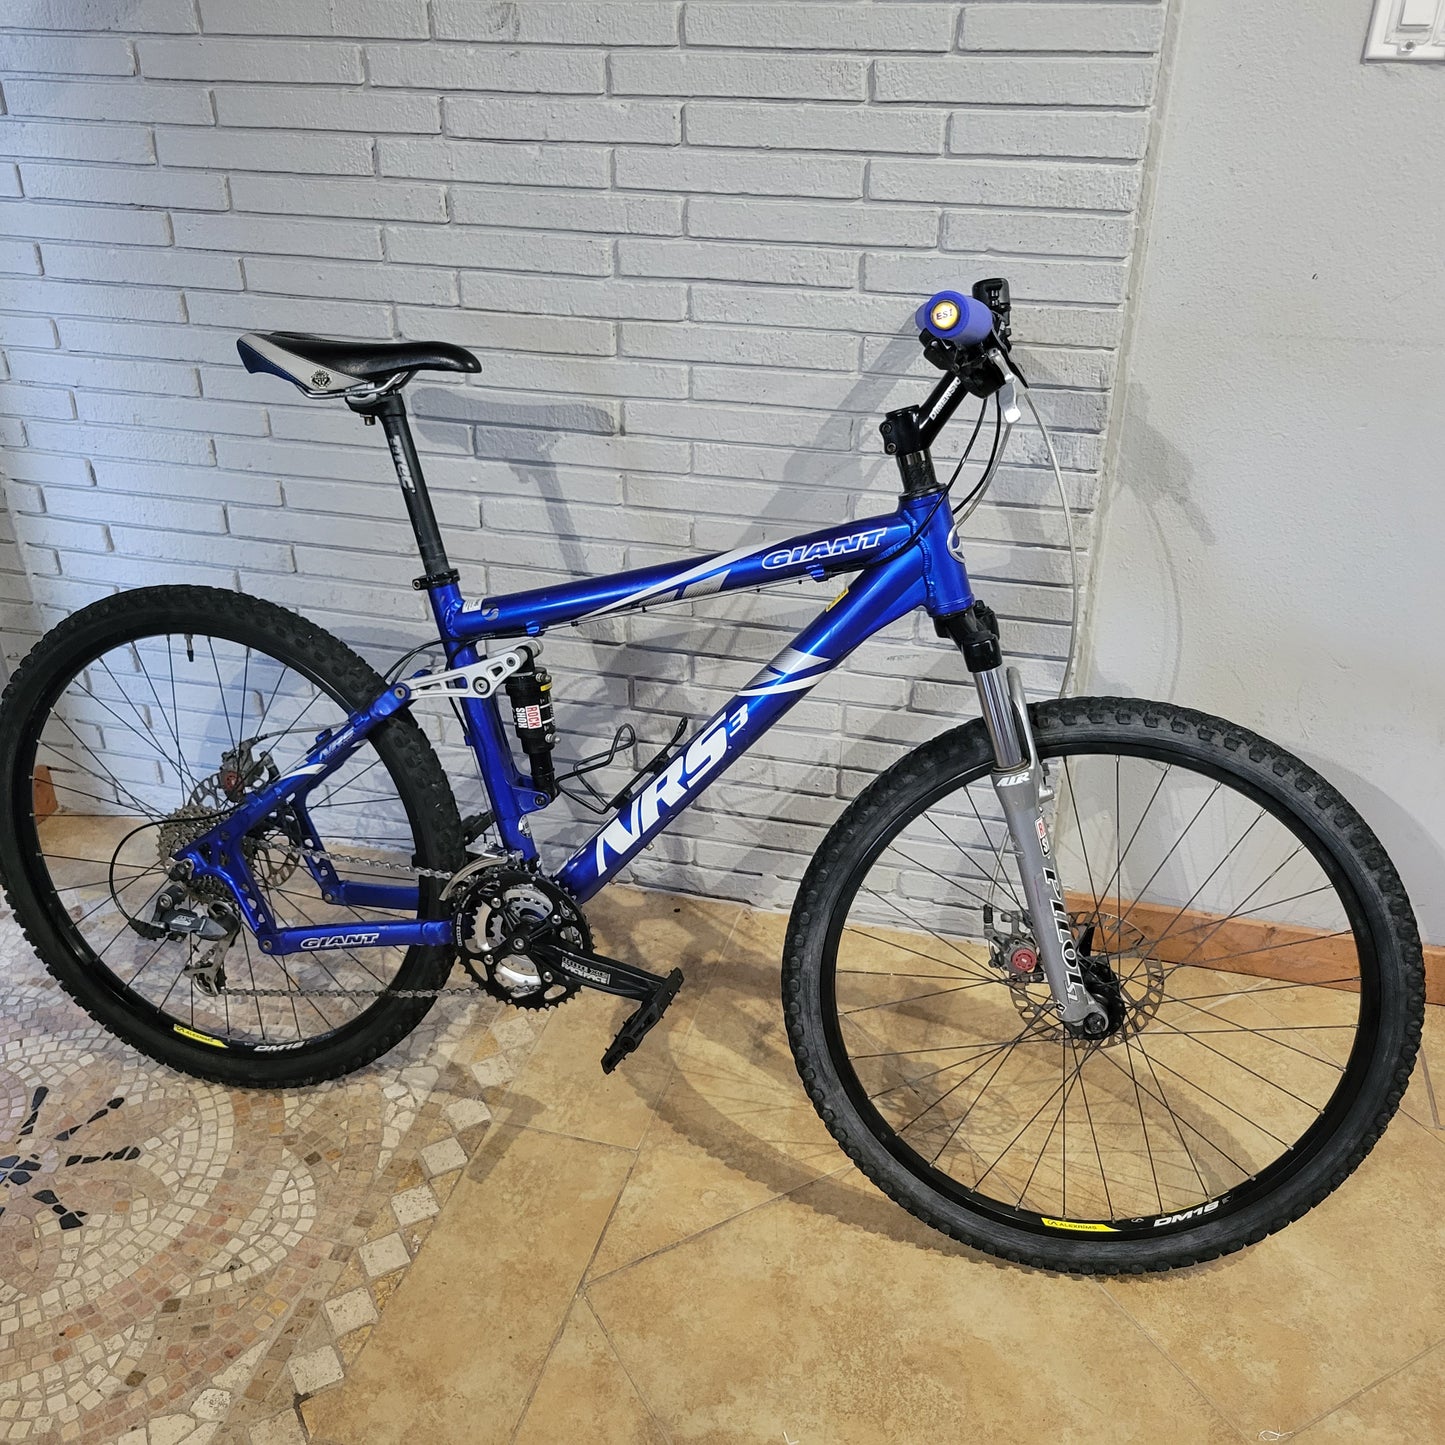 2003 Giant NRS 3 Size 16.5